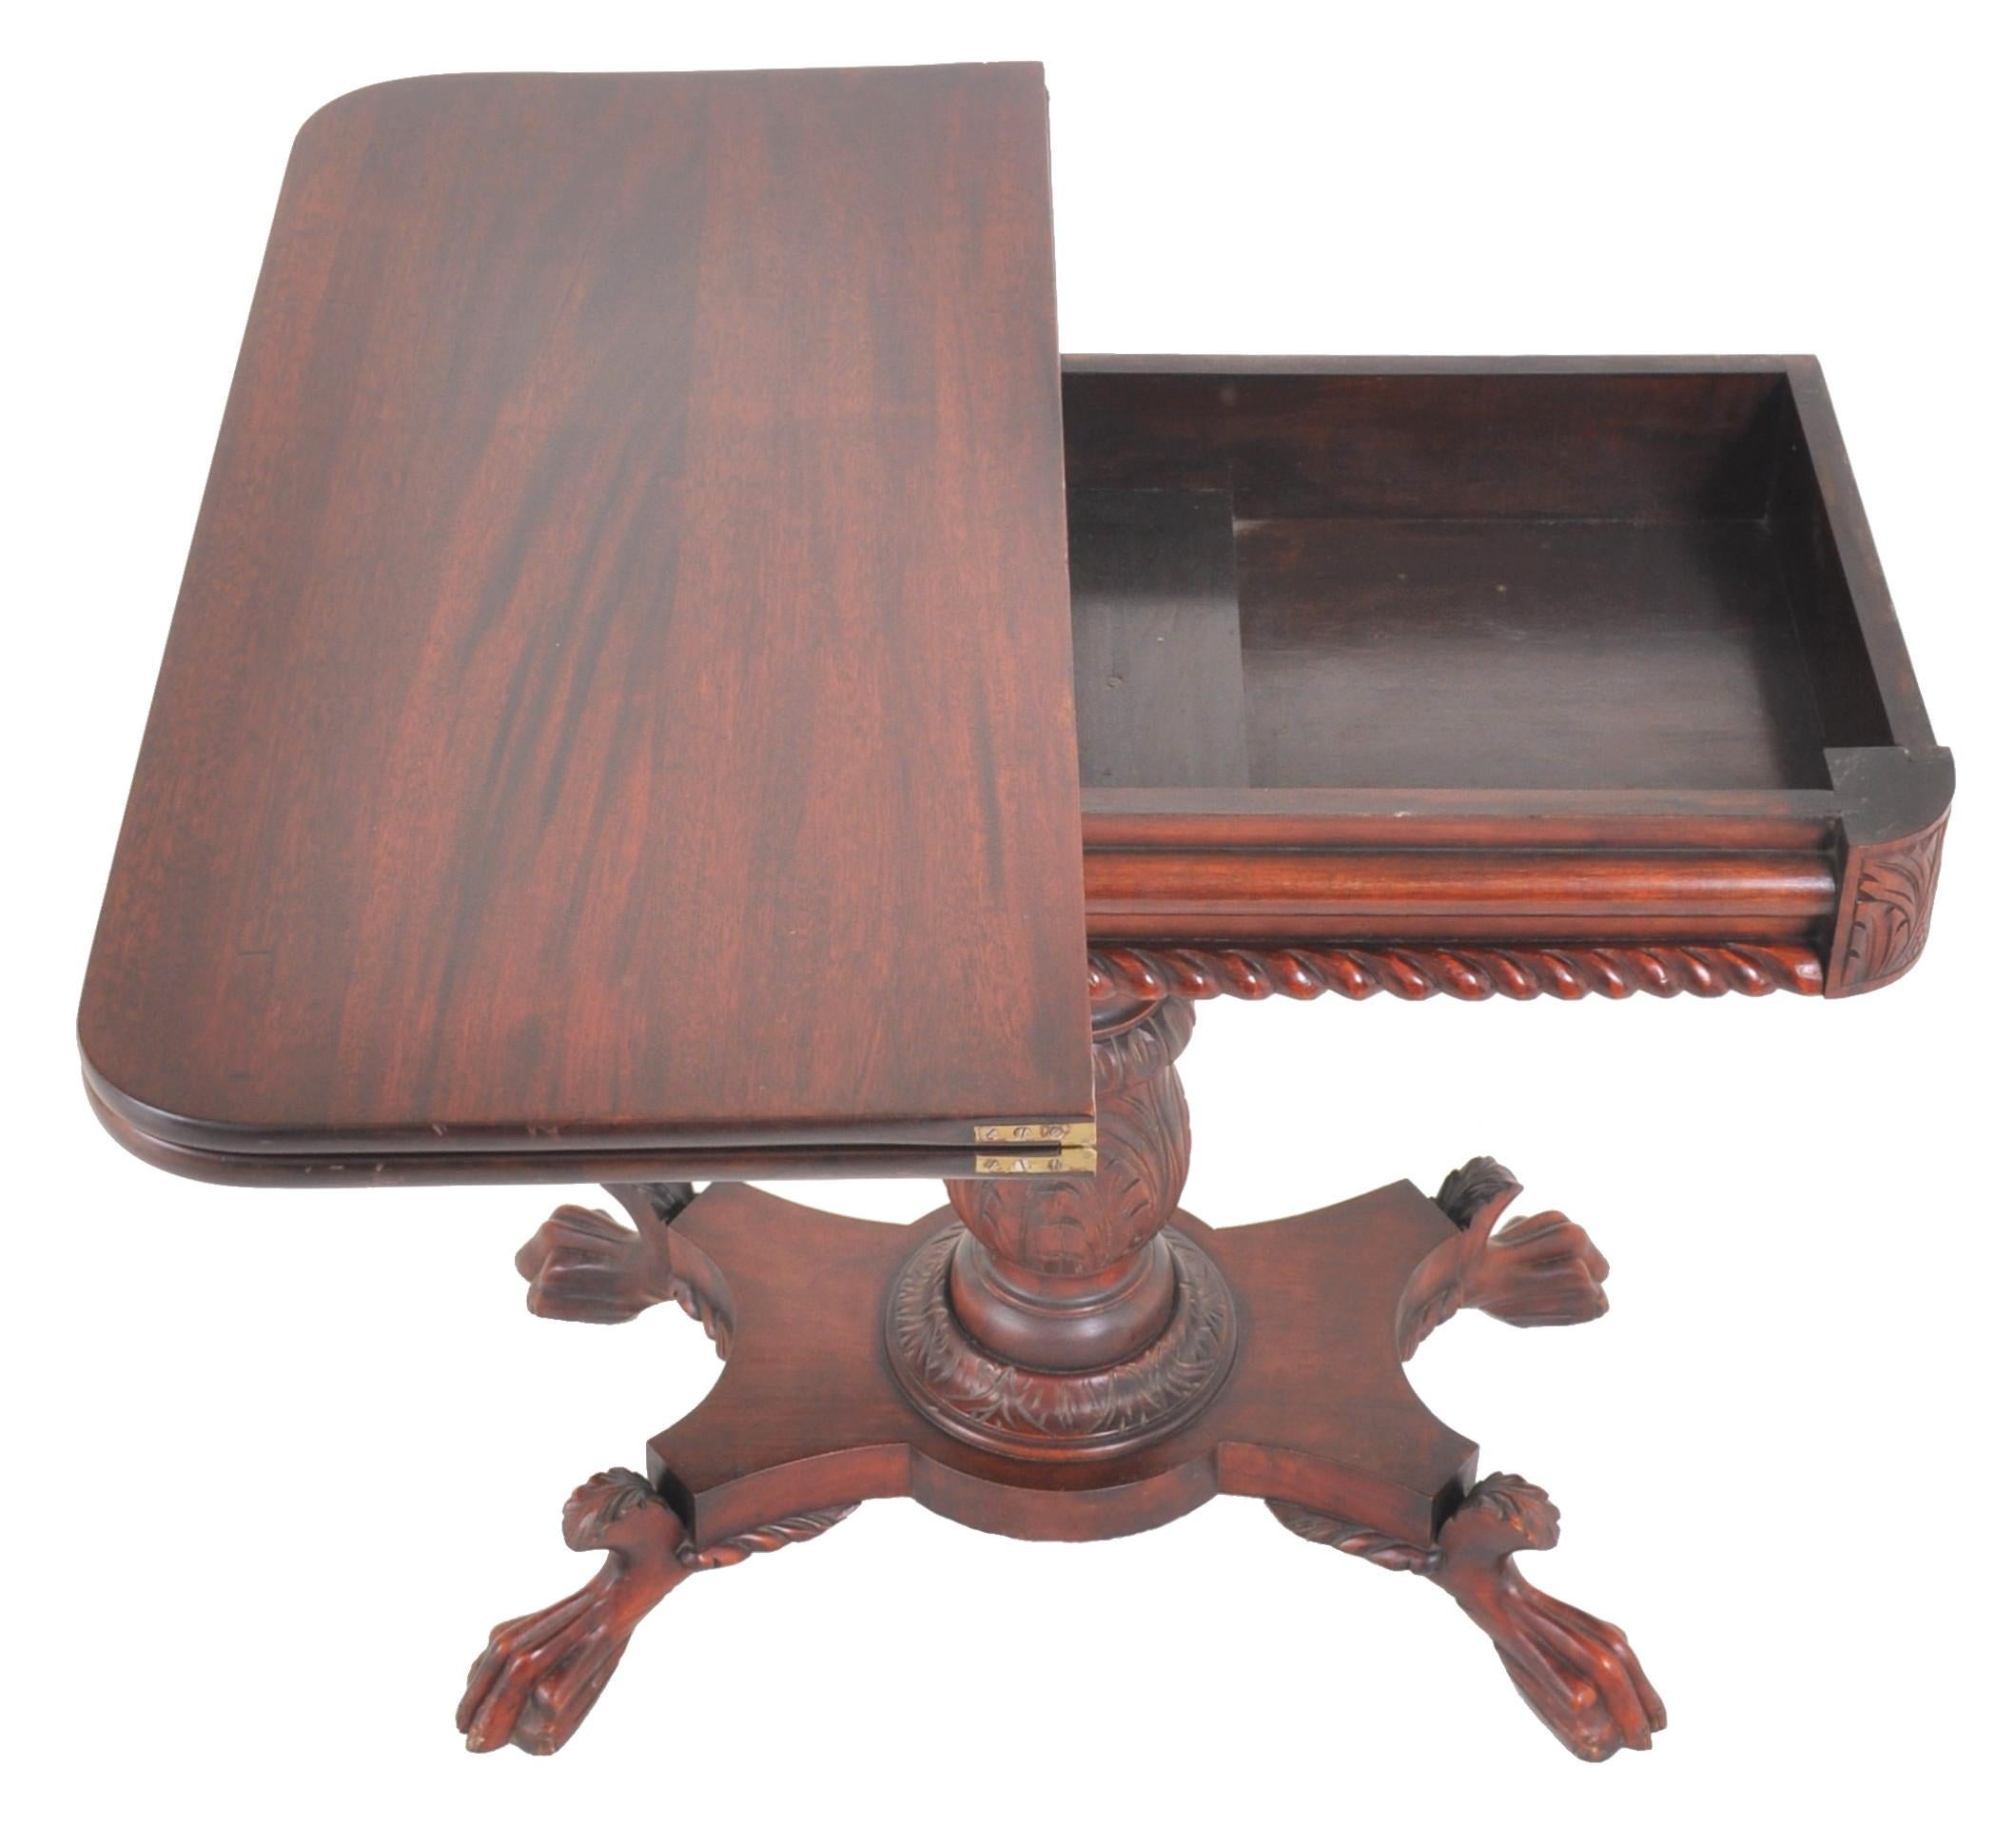 Turned Antique American Late Federal/Empire Mahogany Tea/Games/Card Table, circa 1830 For Sale